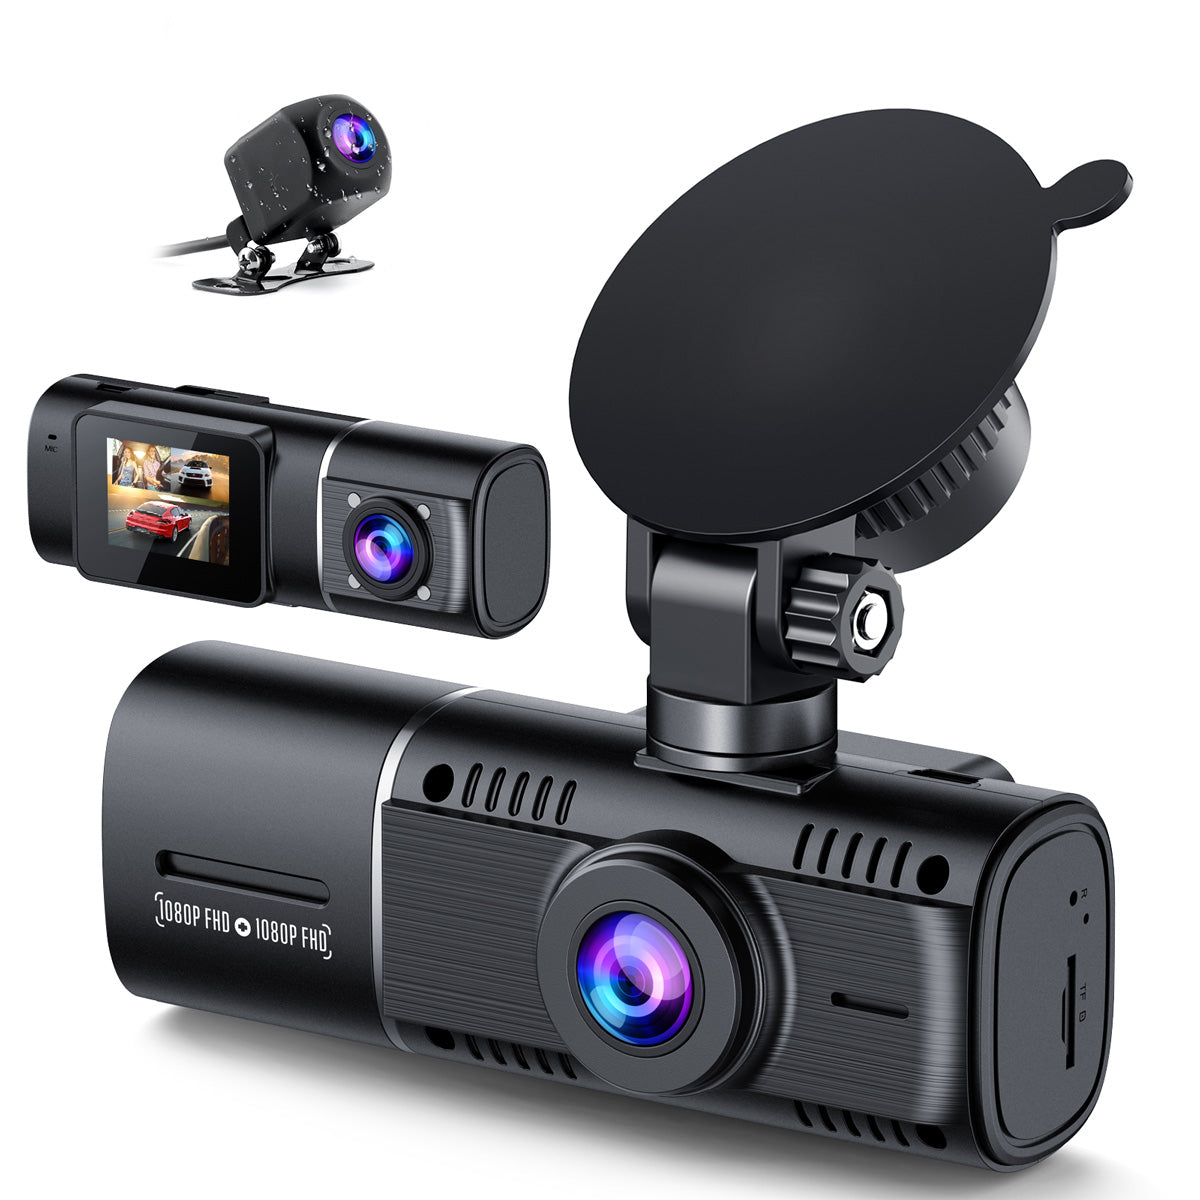 WiFi GPS 4K Dash Cam with IR Night Vision, Toguard 3 Channel Front Inside Rear Dash Camera Car Driving Recorder CE66A